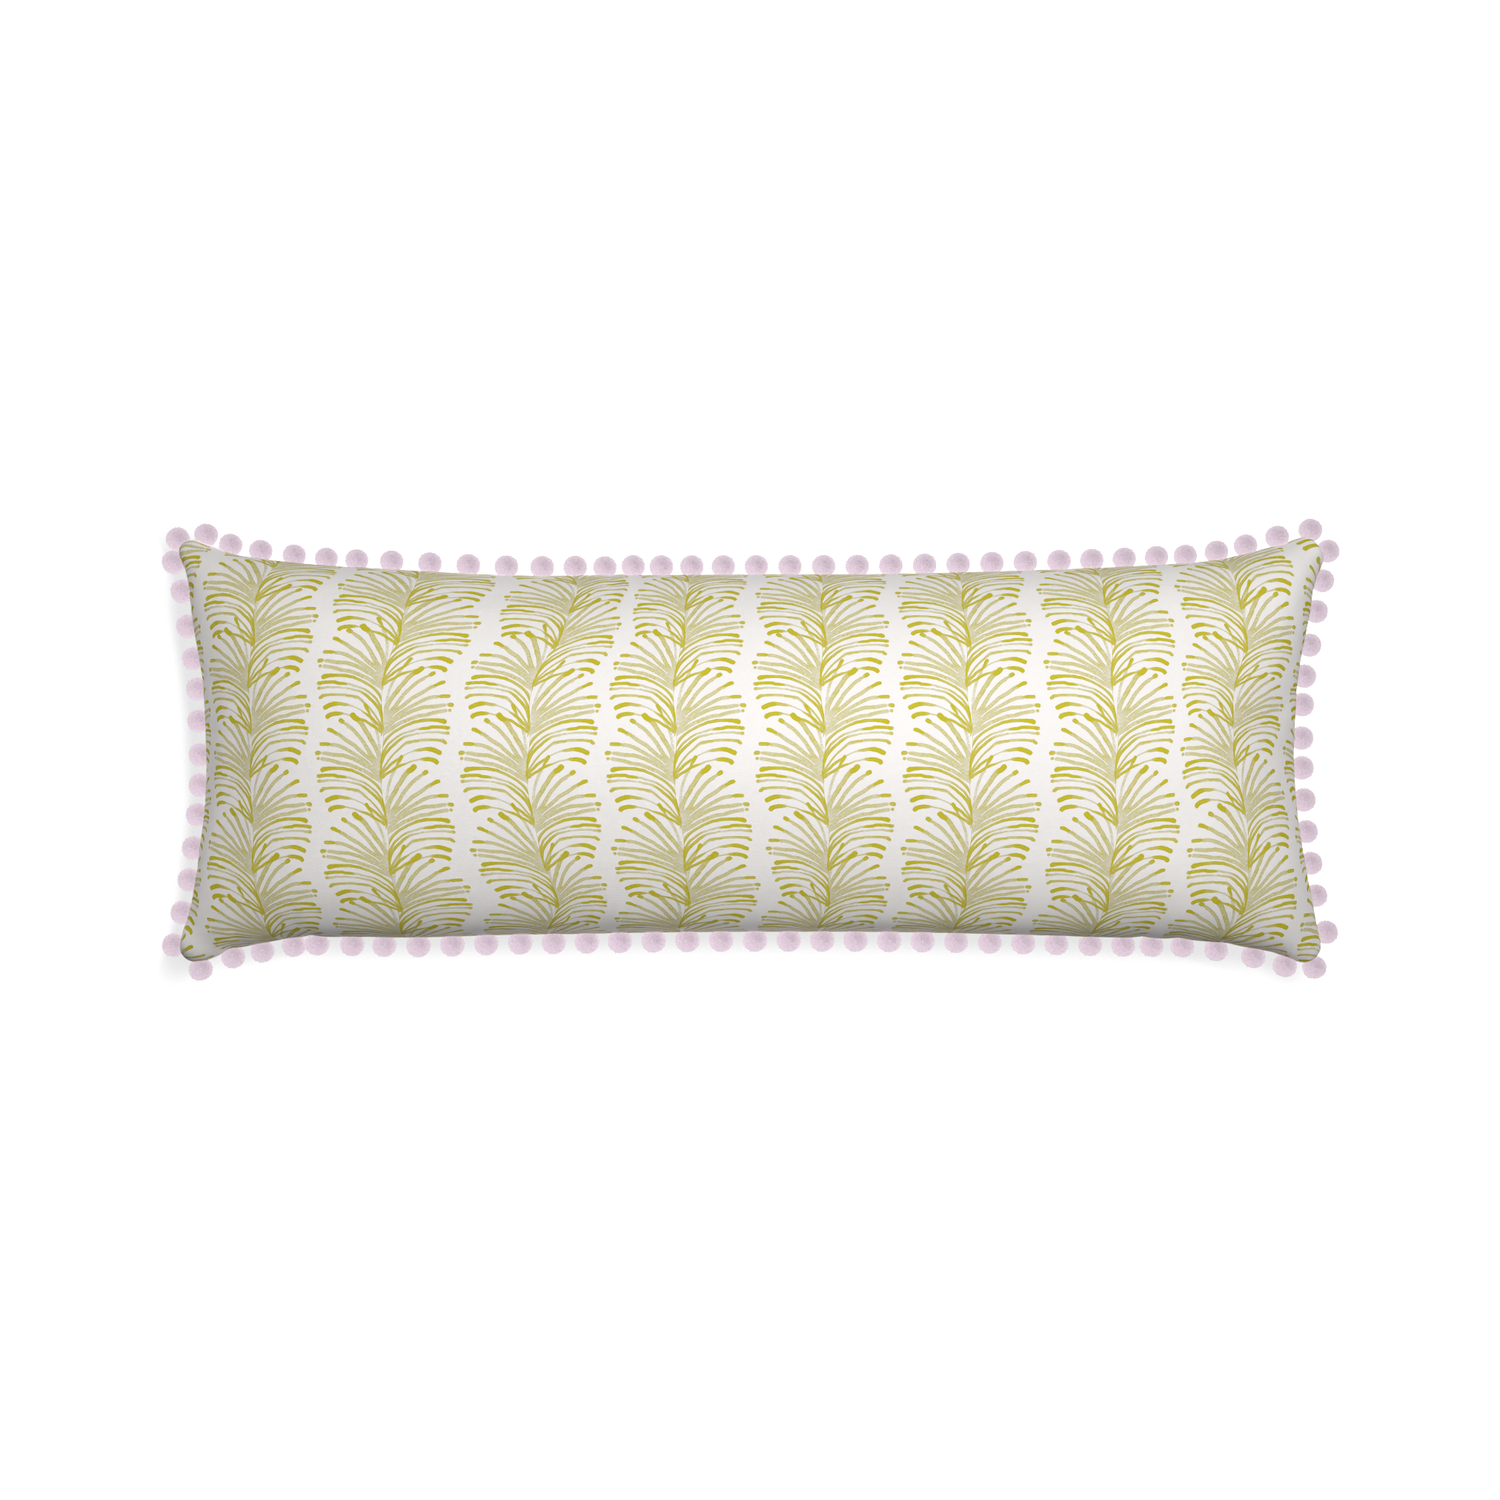 Xl-lumbar emma chartreuse custom yellow stripe chartreusepillow with l on white background